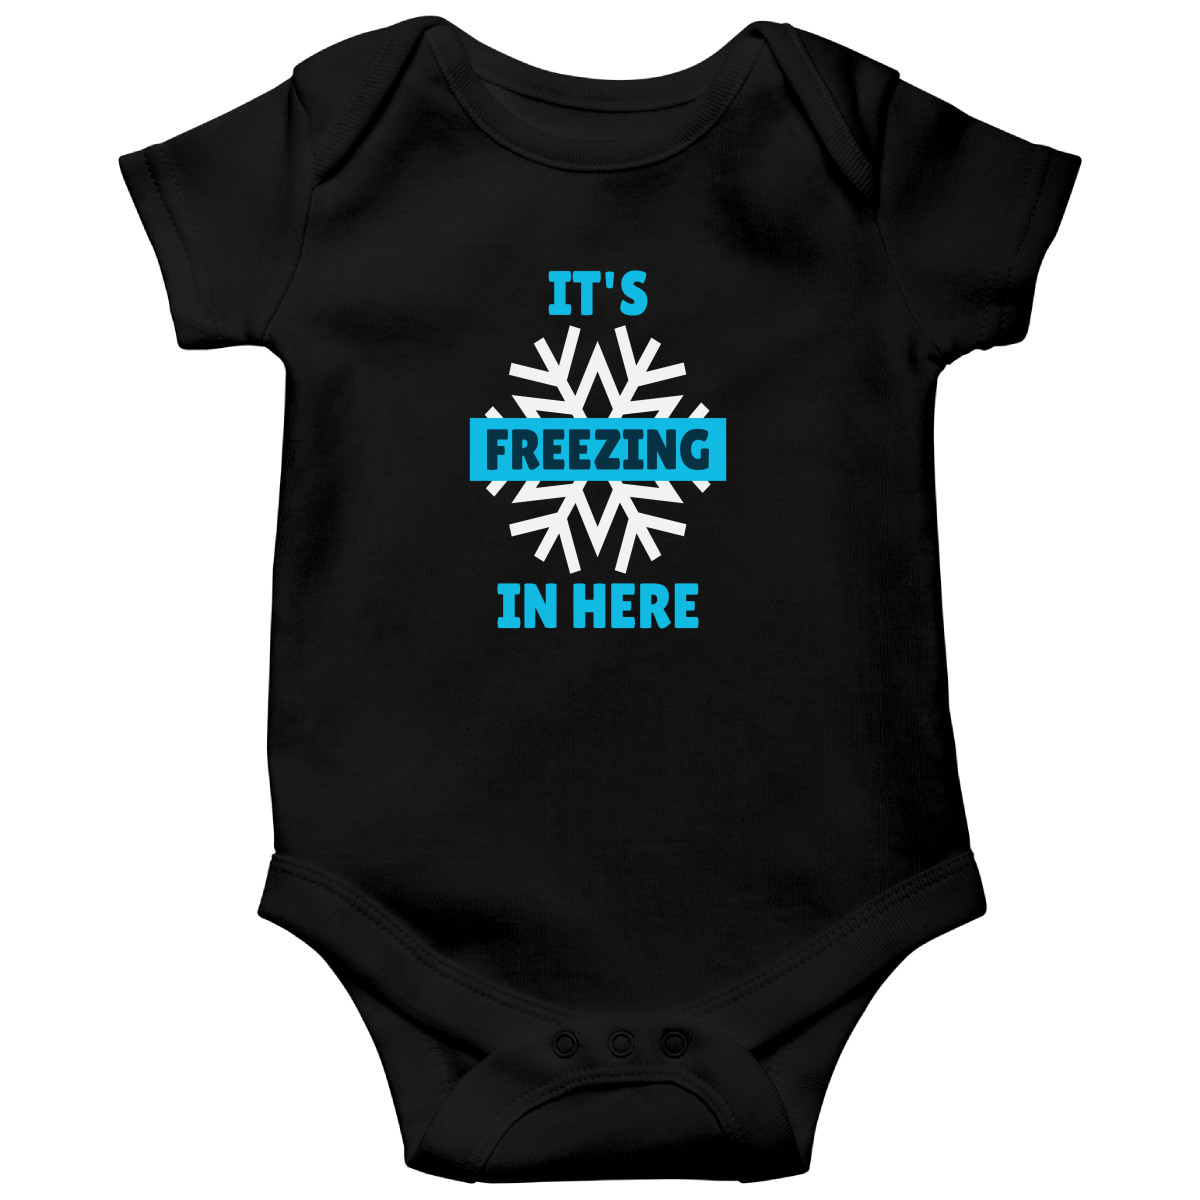 It's Freezing In Here! Baby Bodysuits